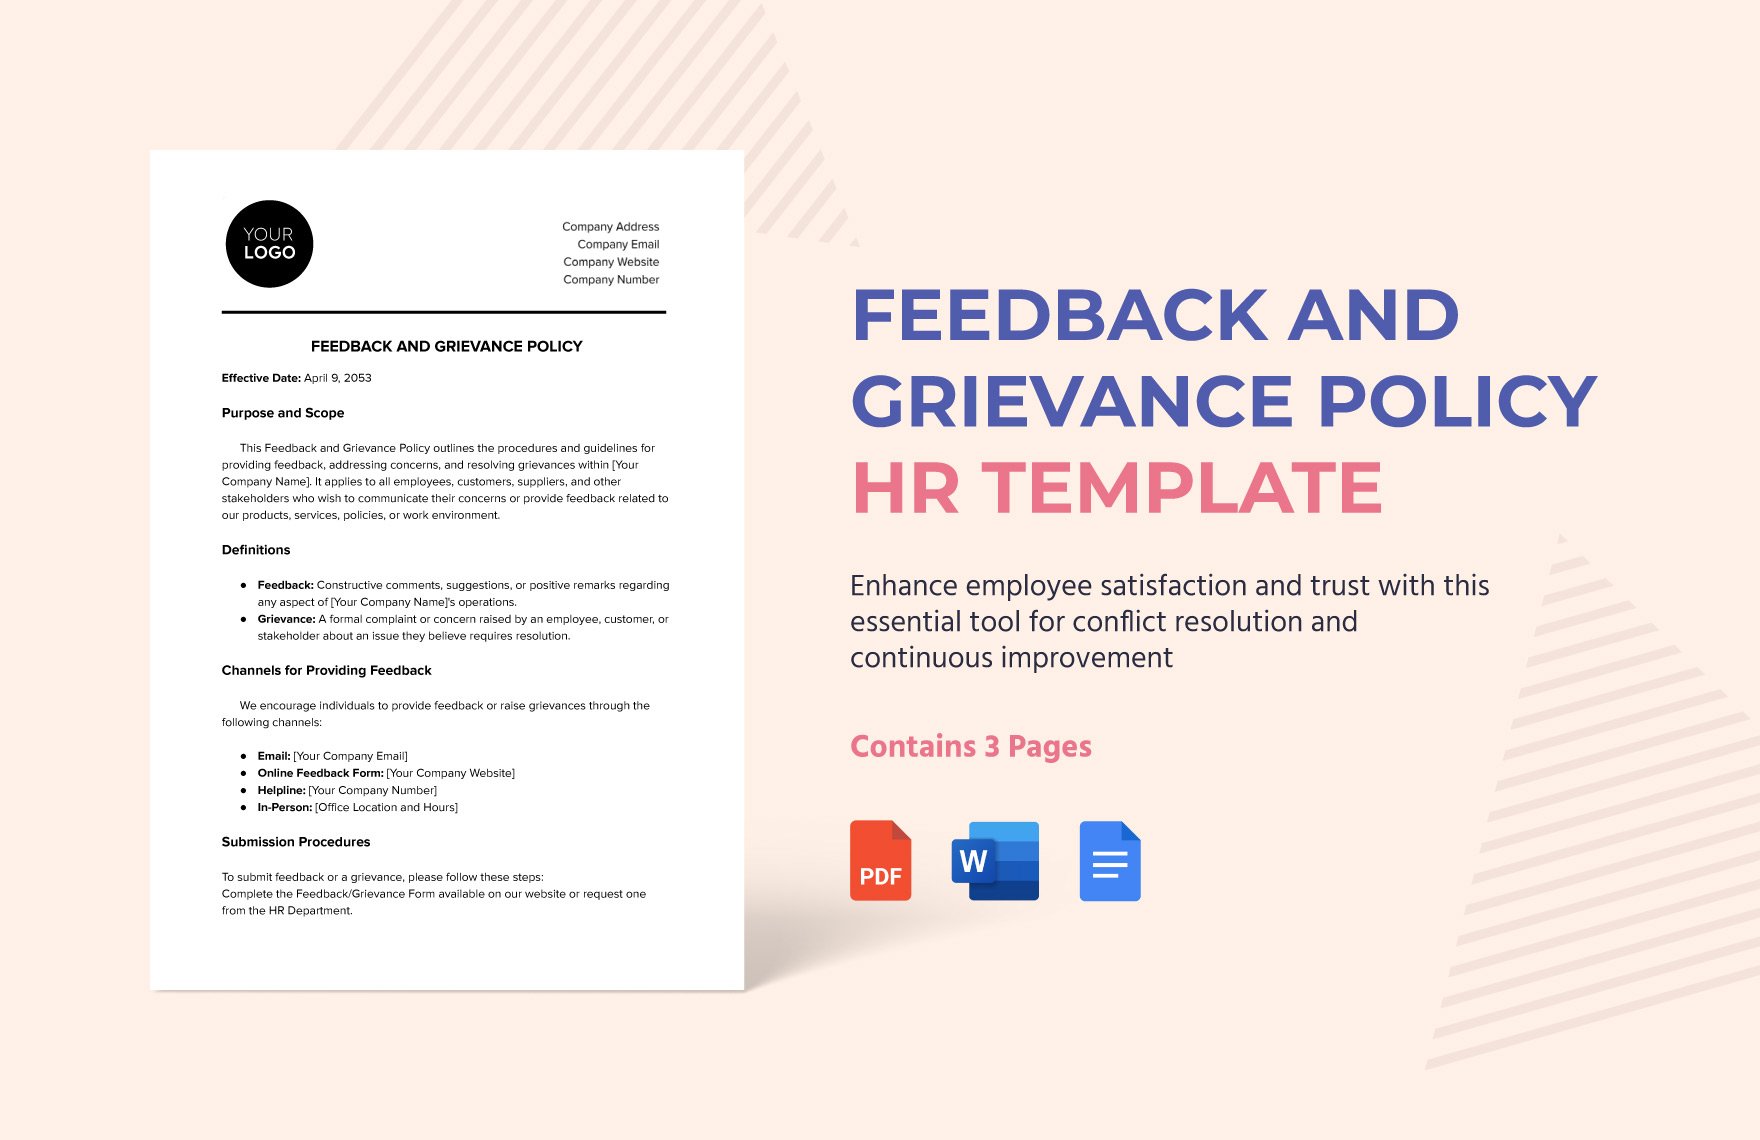 Feedback and Grievance Policy HR Template